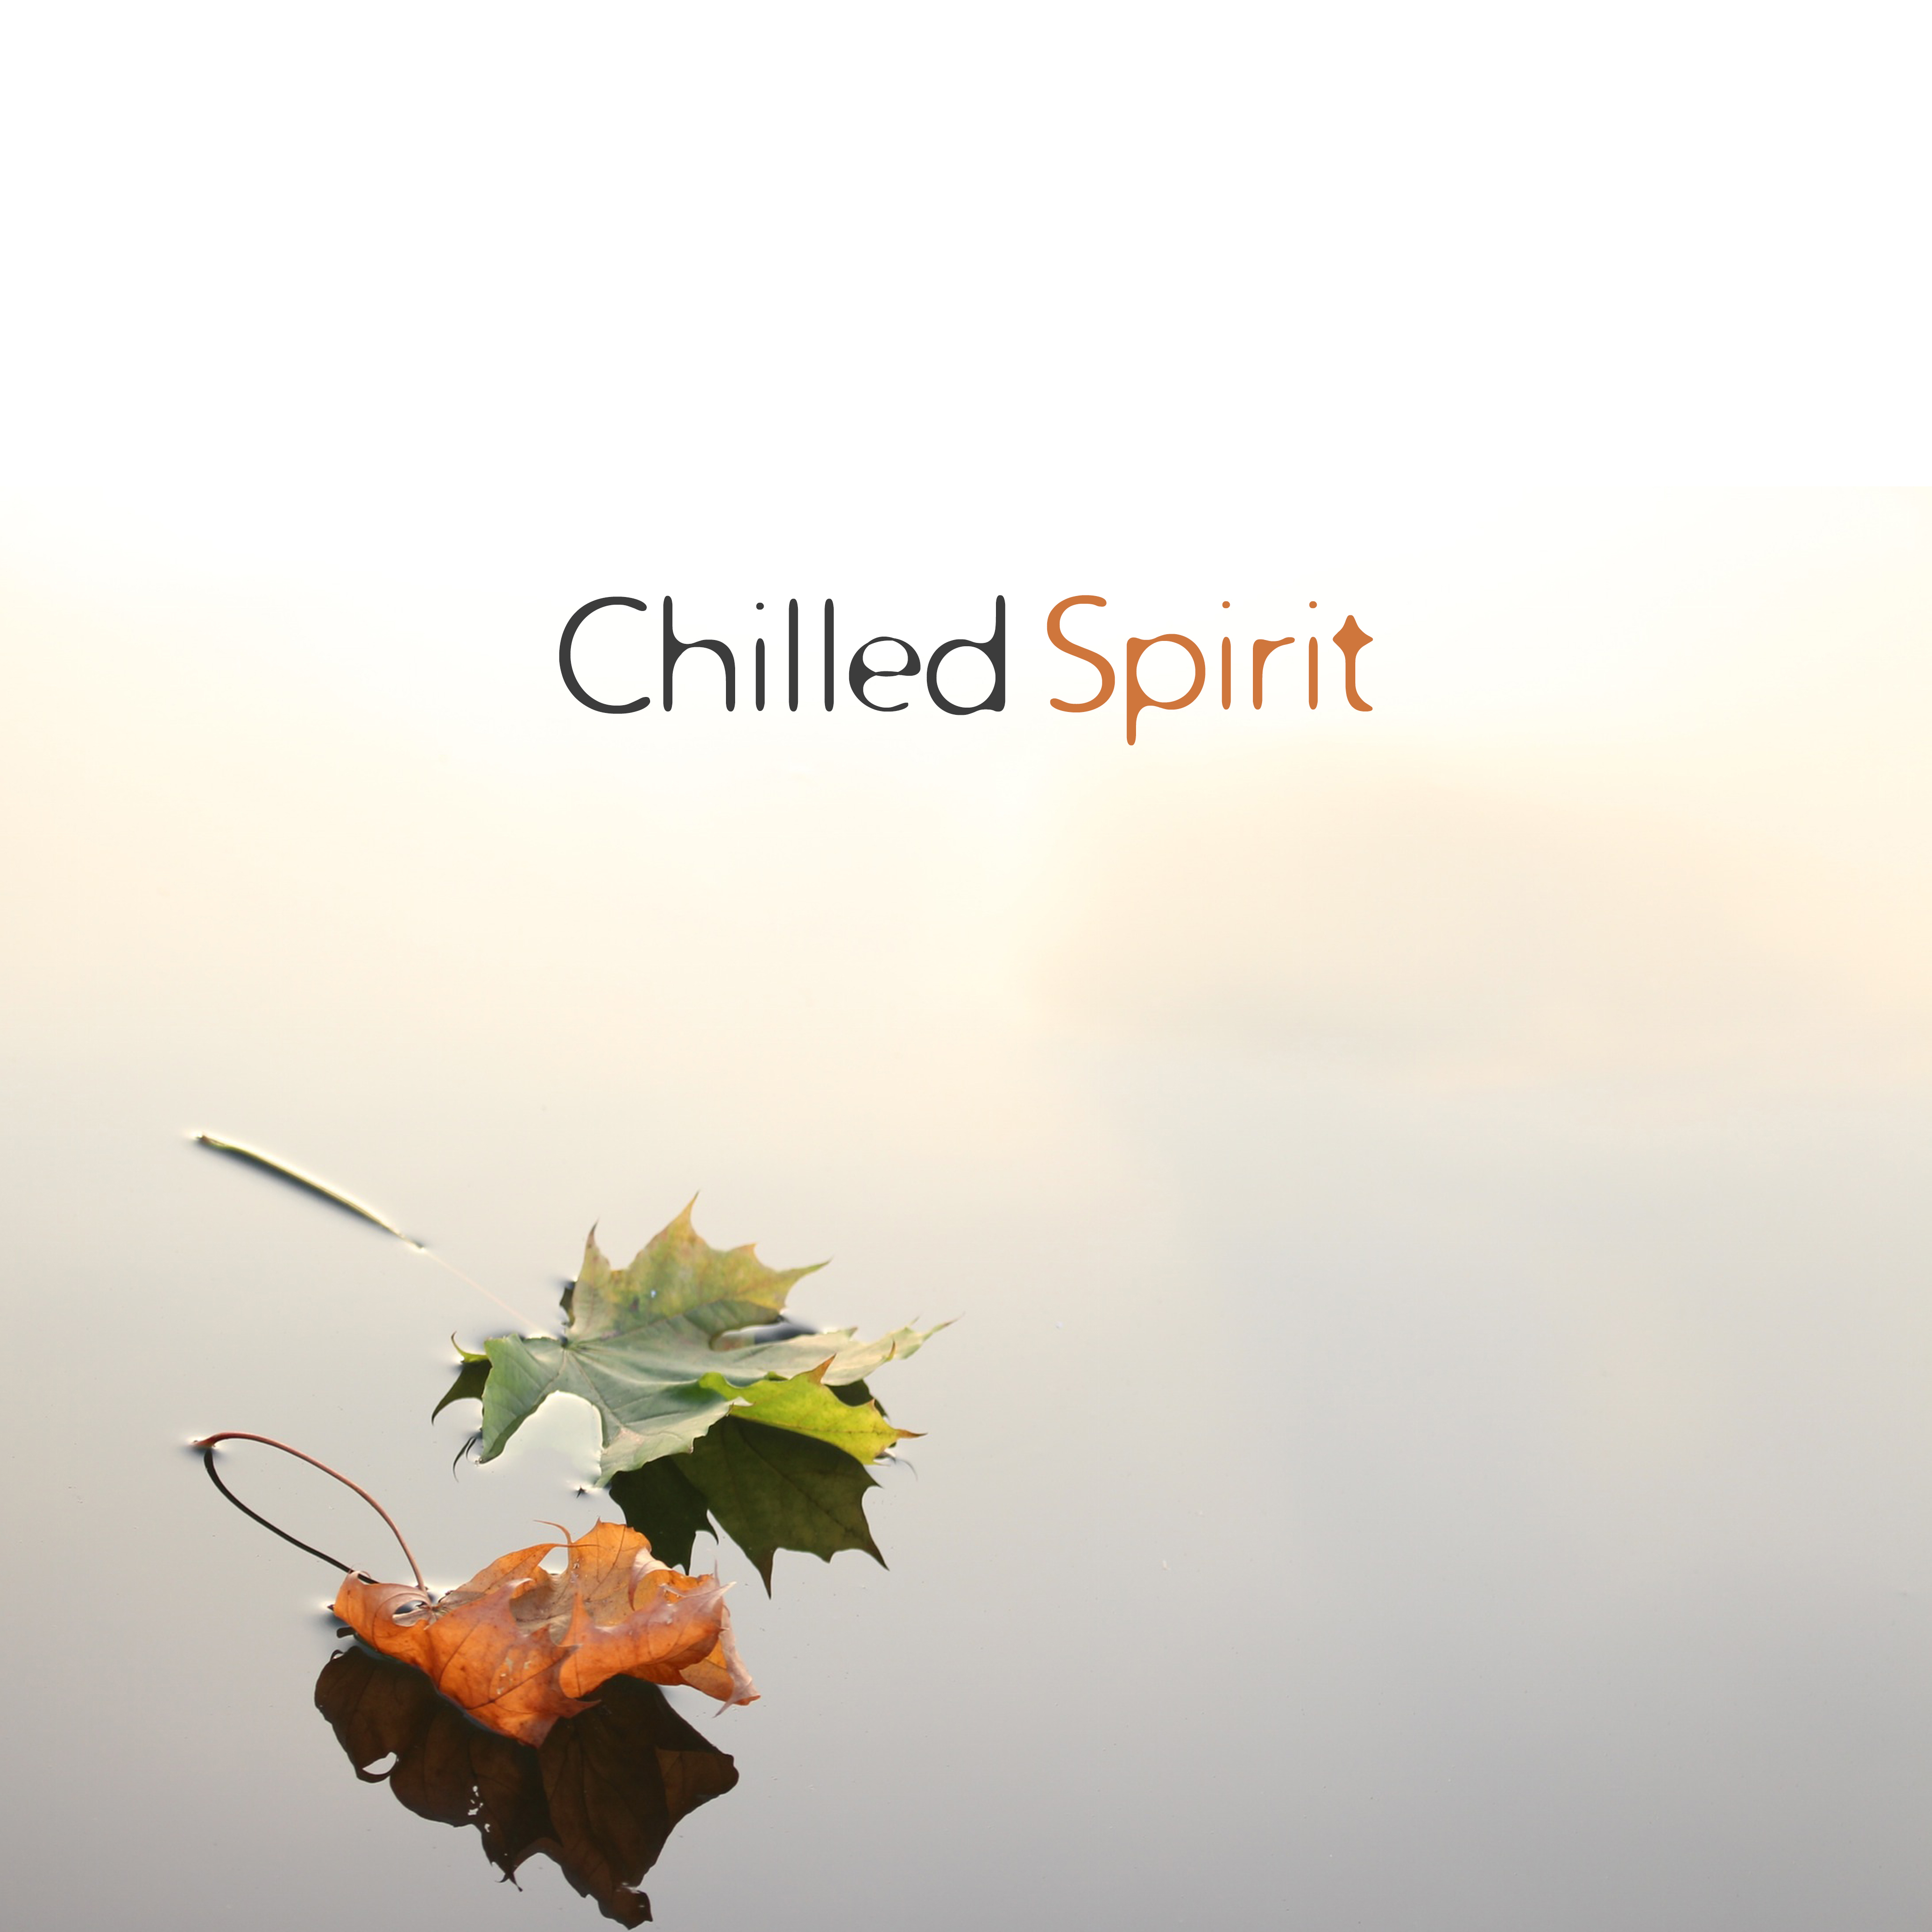 Chilled Spirit  Nature Sounds, Calming New Age Music, Relax Time, Bliss, Zen